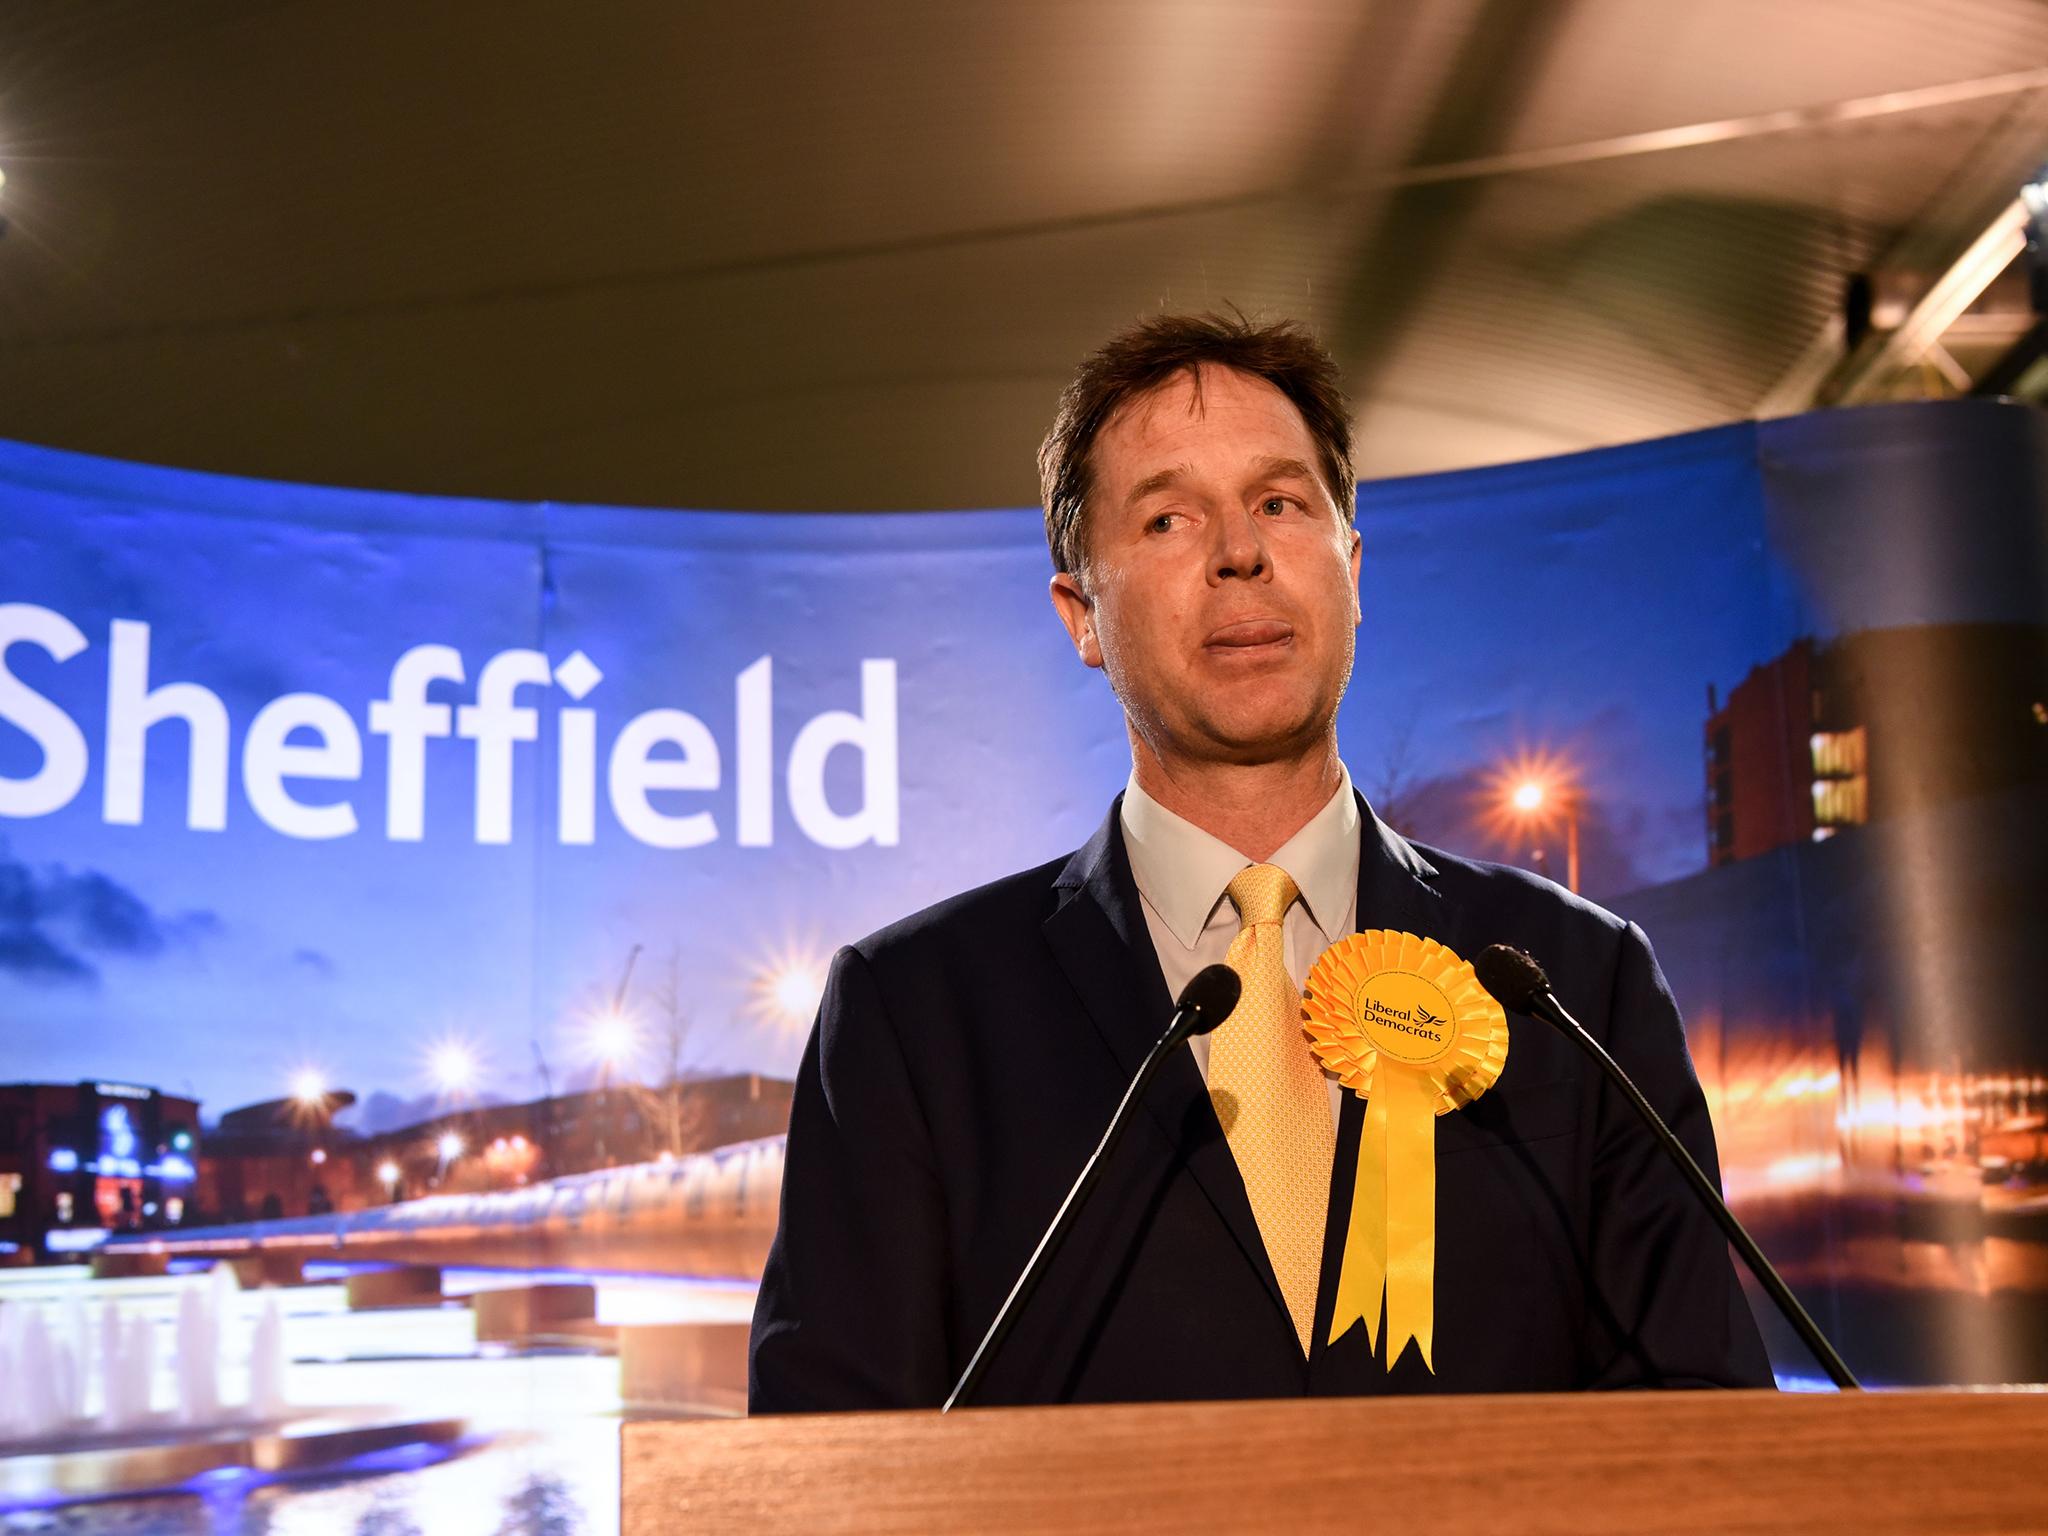 Nick Clegg lost his parliamentary seat in the general election